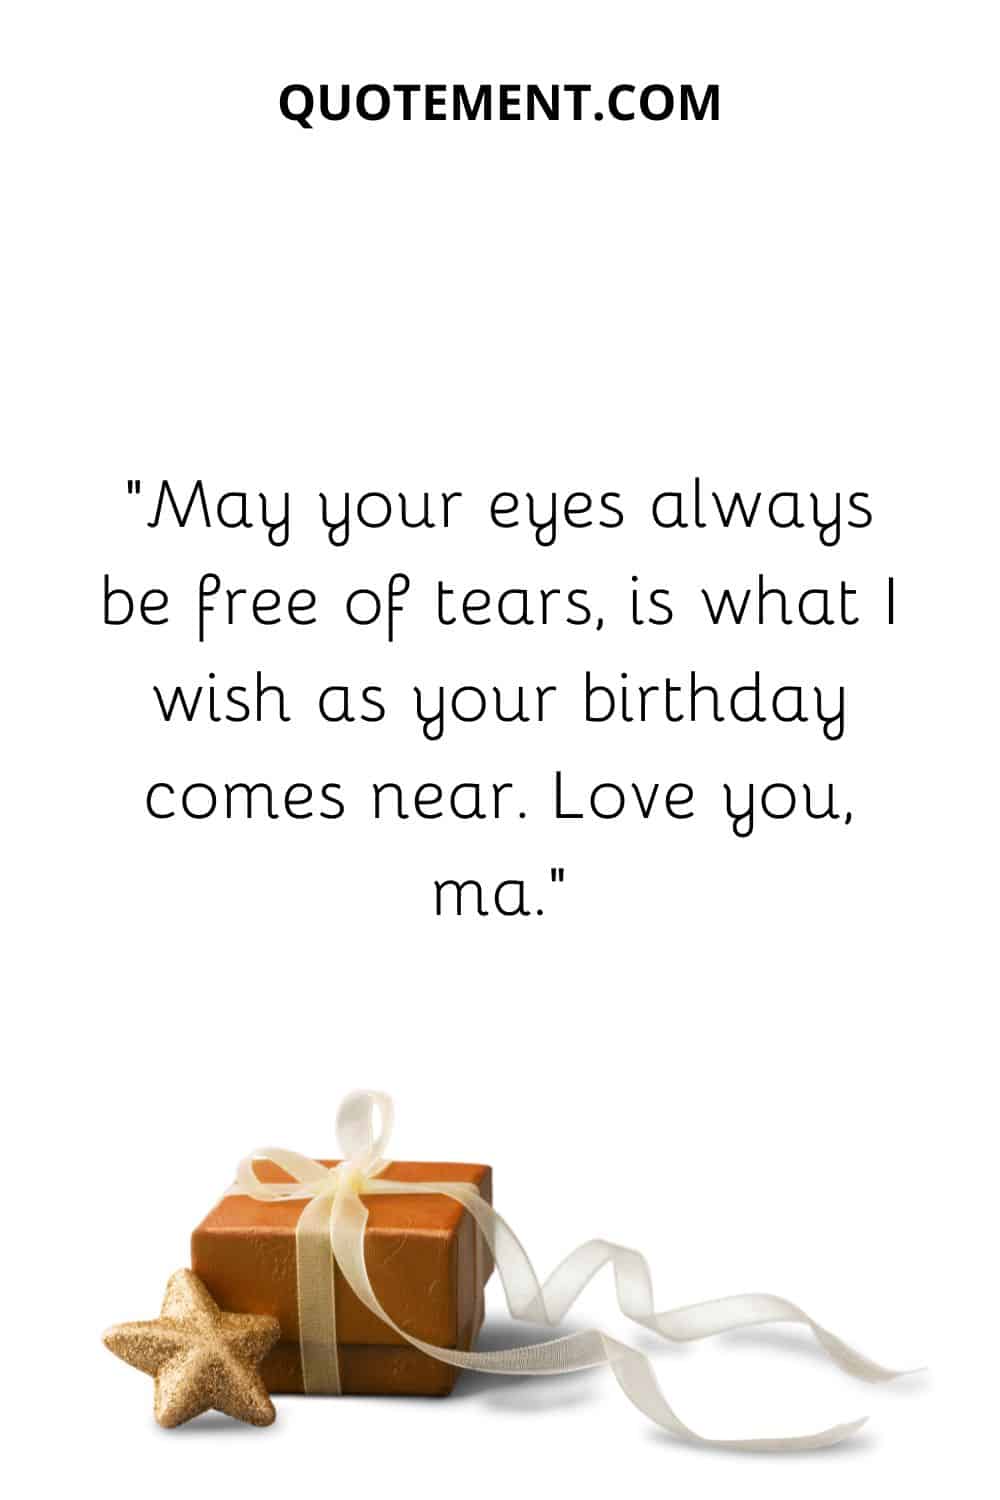 May your eyes always be free of tears